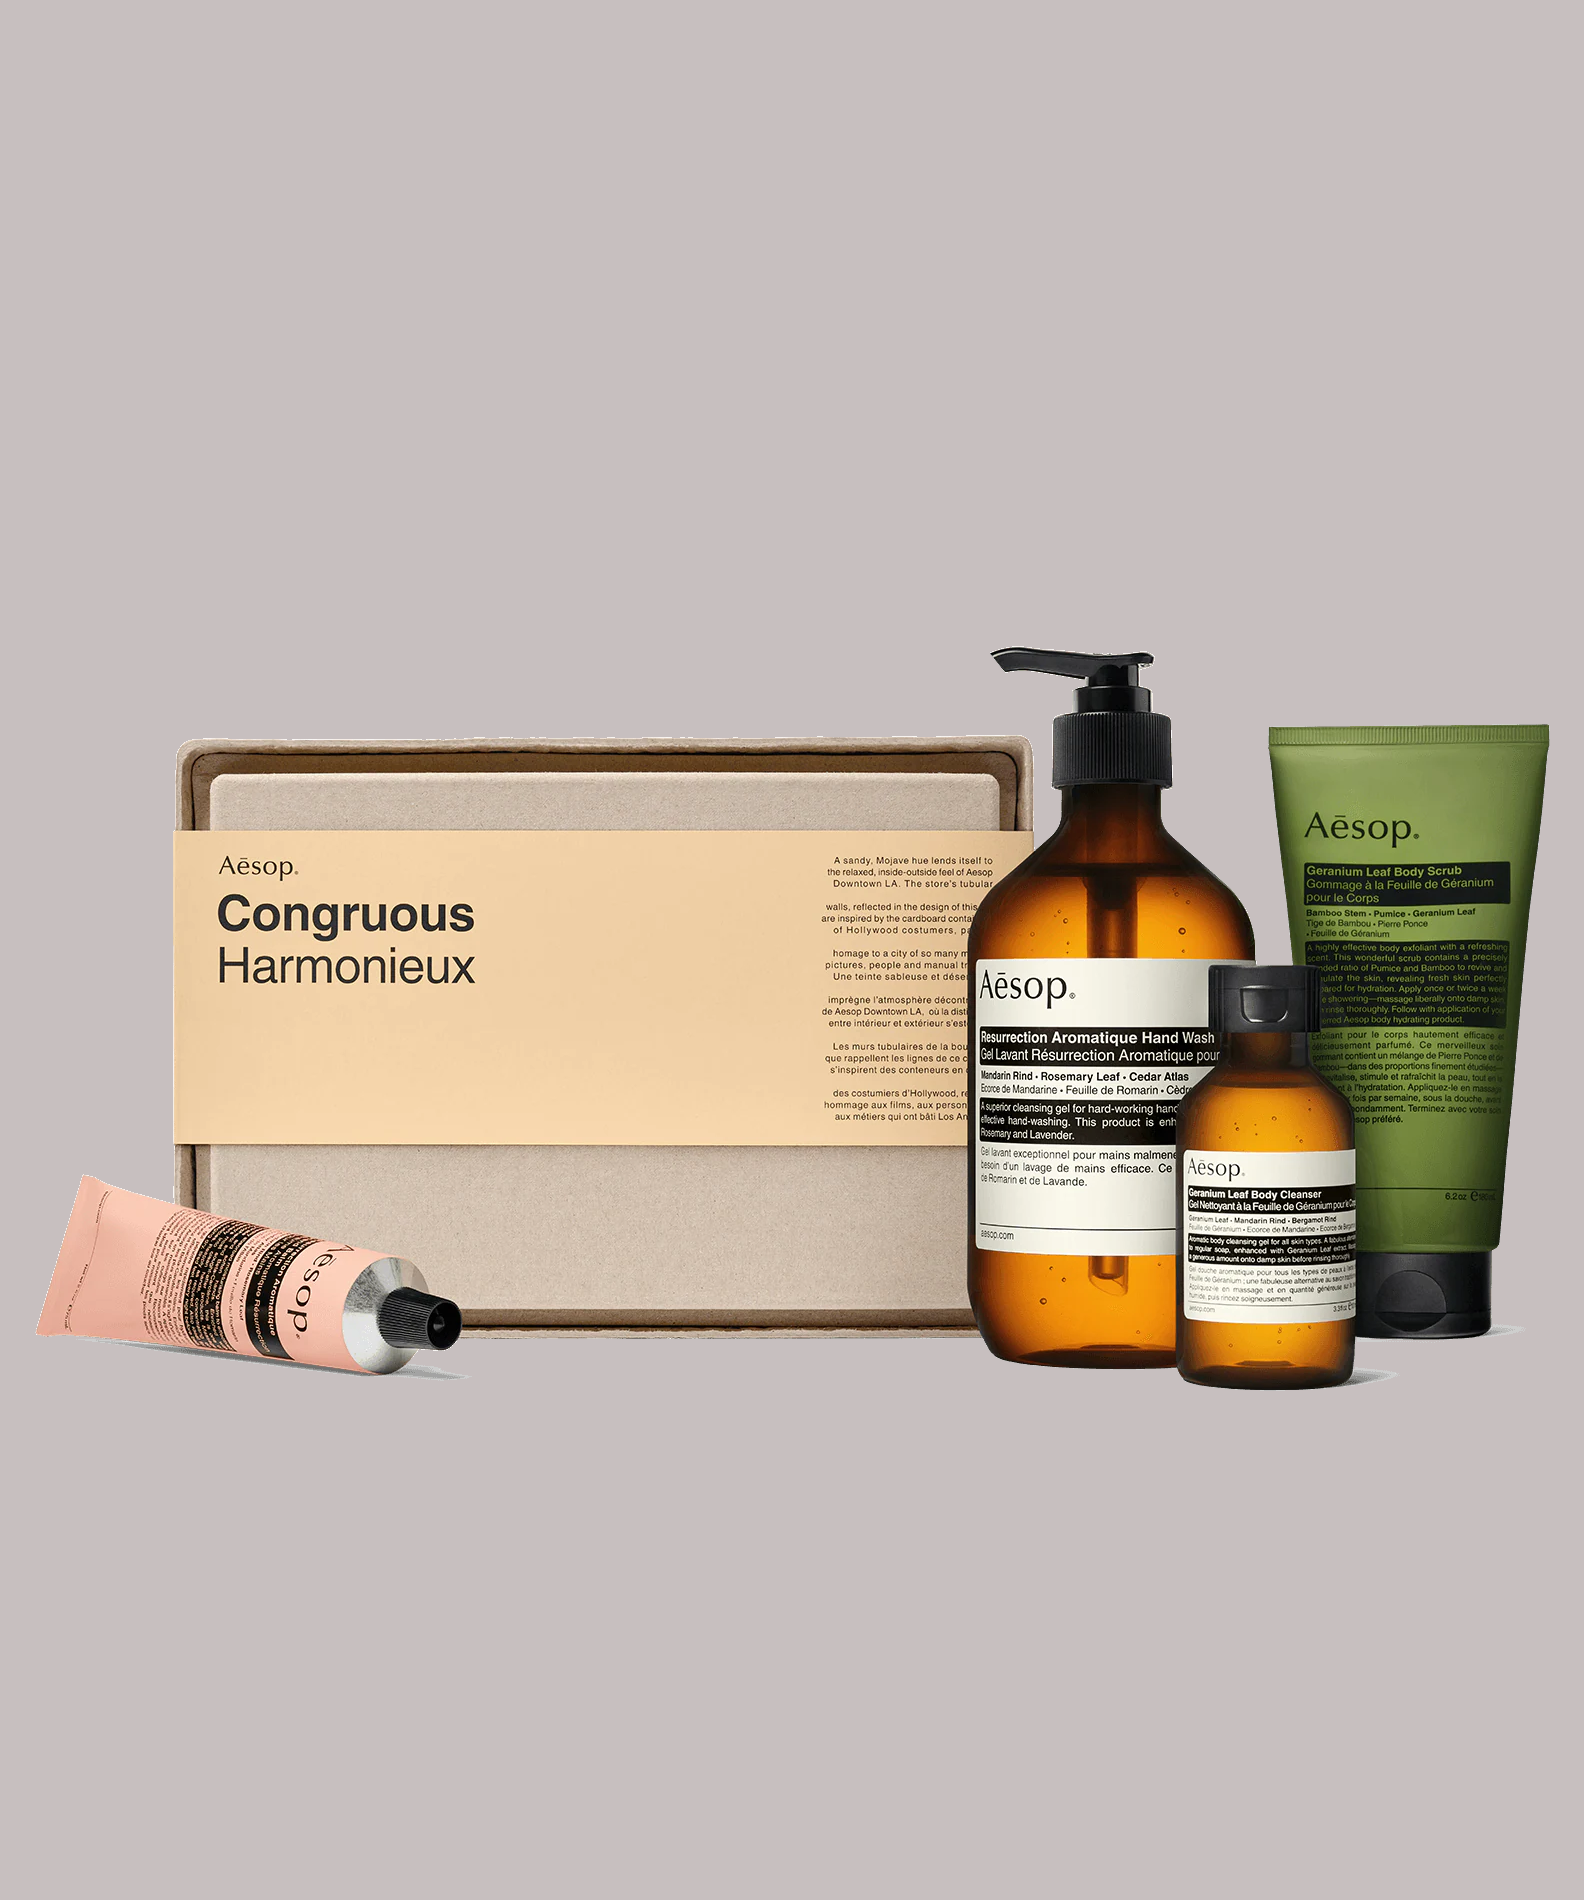 Image of the AEsop Congruous gift set against a grey backdrop. The image shows the box, aesop handcream, handwash, body cleanser and body scrub.